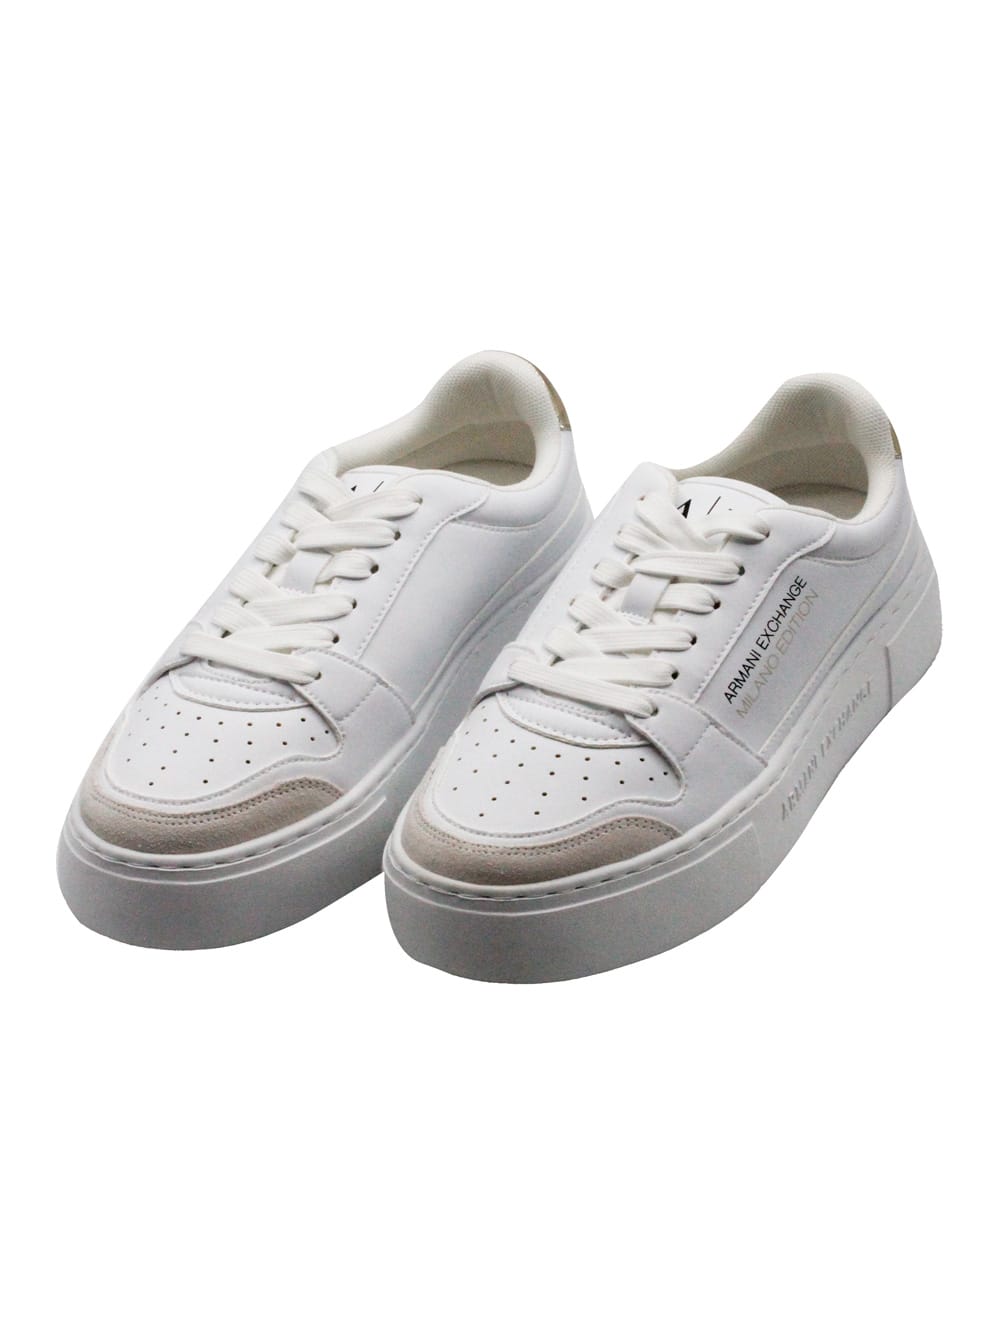 Armani Collezioni Leather Sneakers With Matching Box Sole And Lace Closure. Small Golden Rear Logo And Side Writing In White